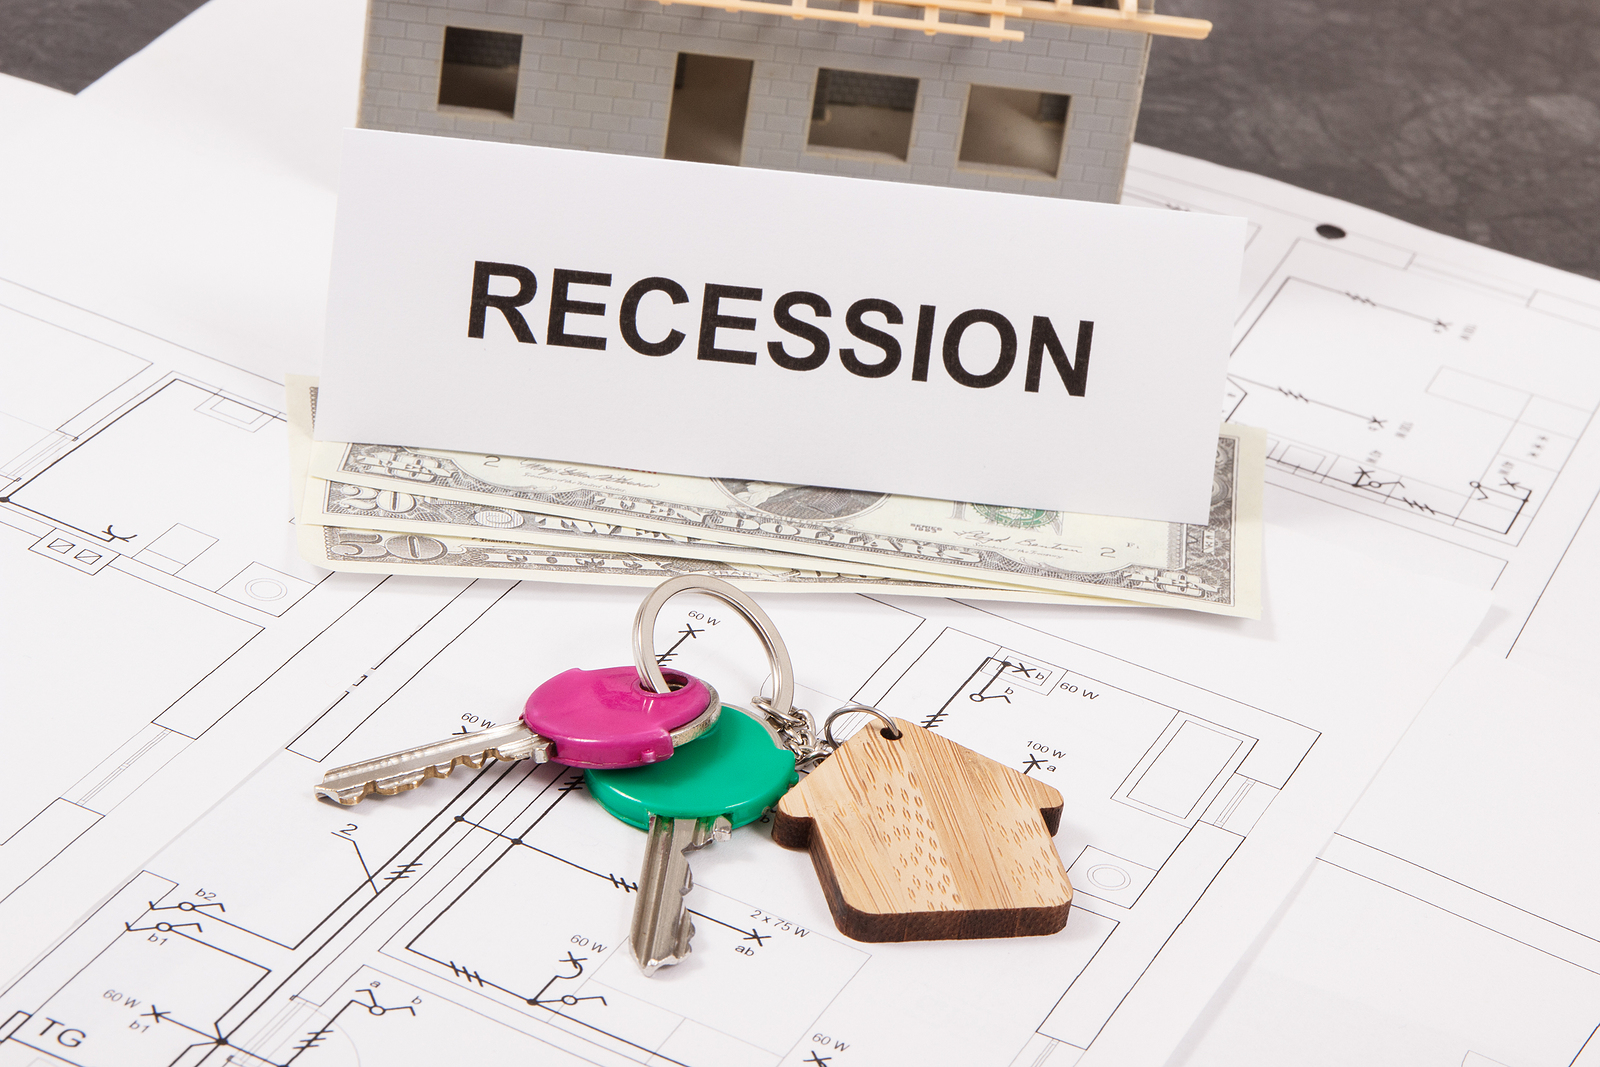 Fannie Mae: Recession “When,” Not “If”